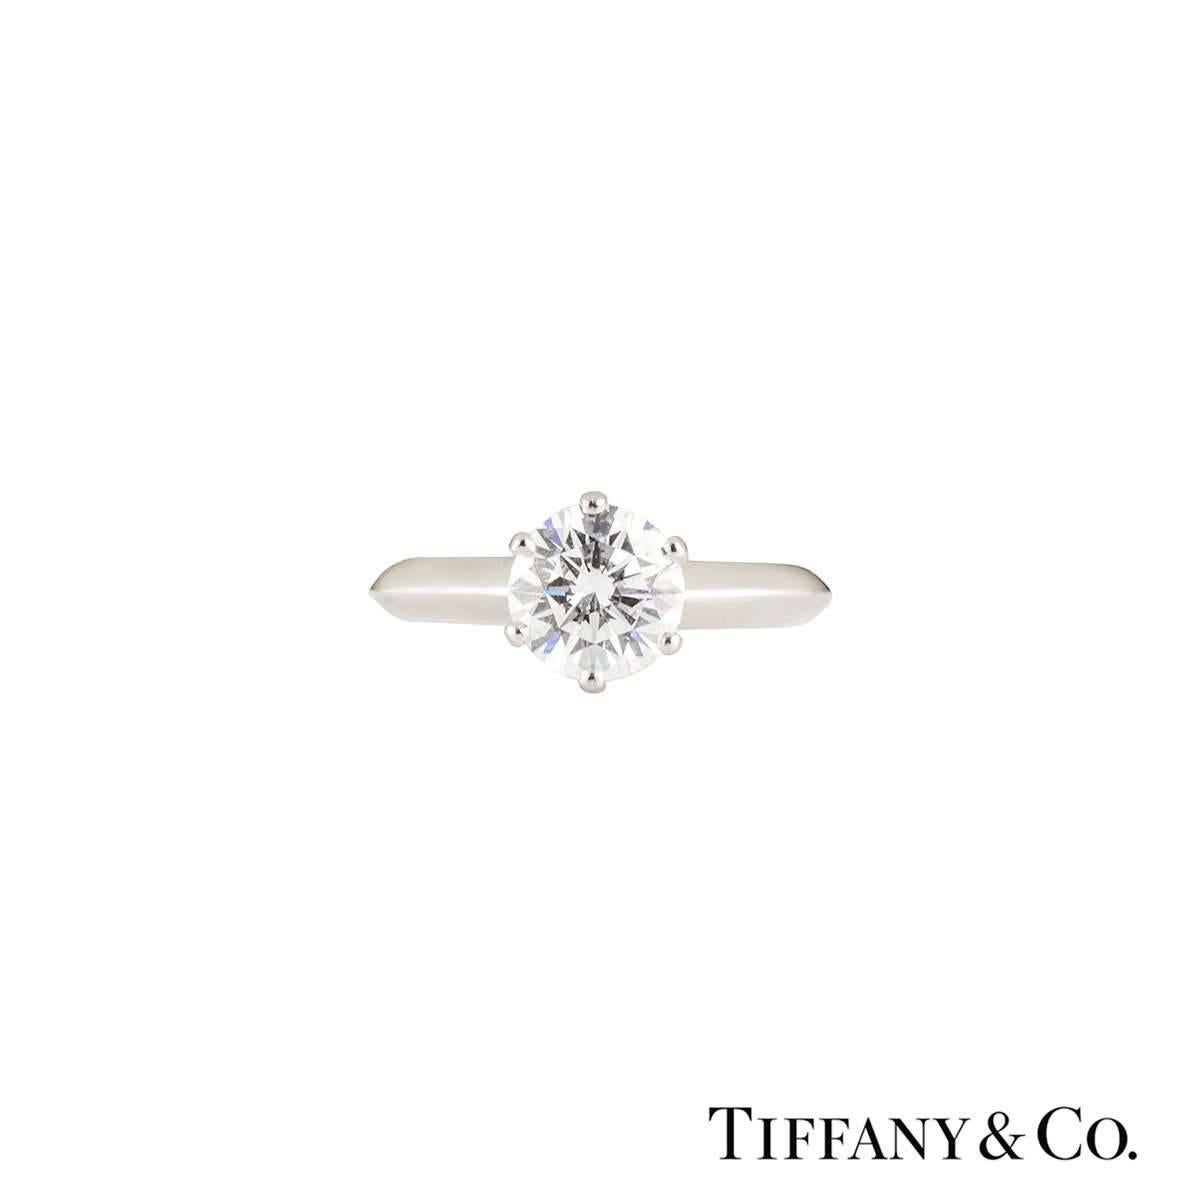 A classic Tiffany & Co. diamond engagement ring from The Tiffany Setting Band collection. The ring comprises of a round brilliant cut diamonds in a prong setting with a weight of 1.05ct, G colour and VVS1 clarity. The ring is a size UK G, US 3 3/8,